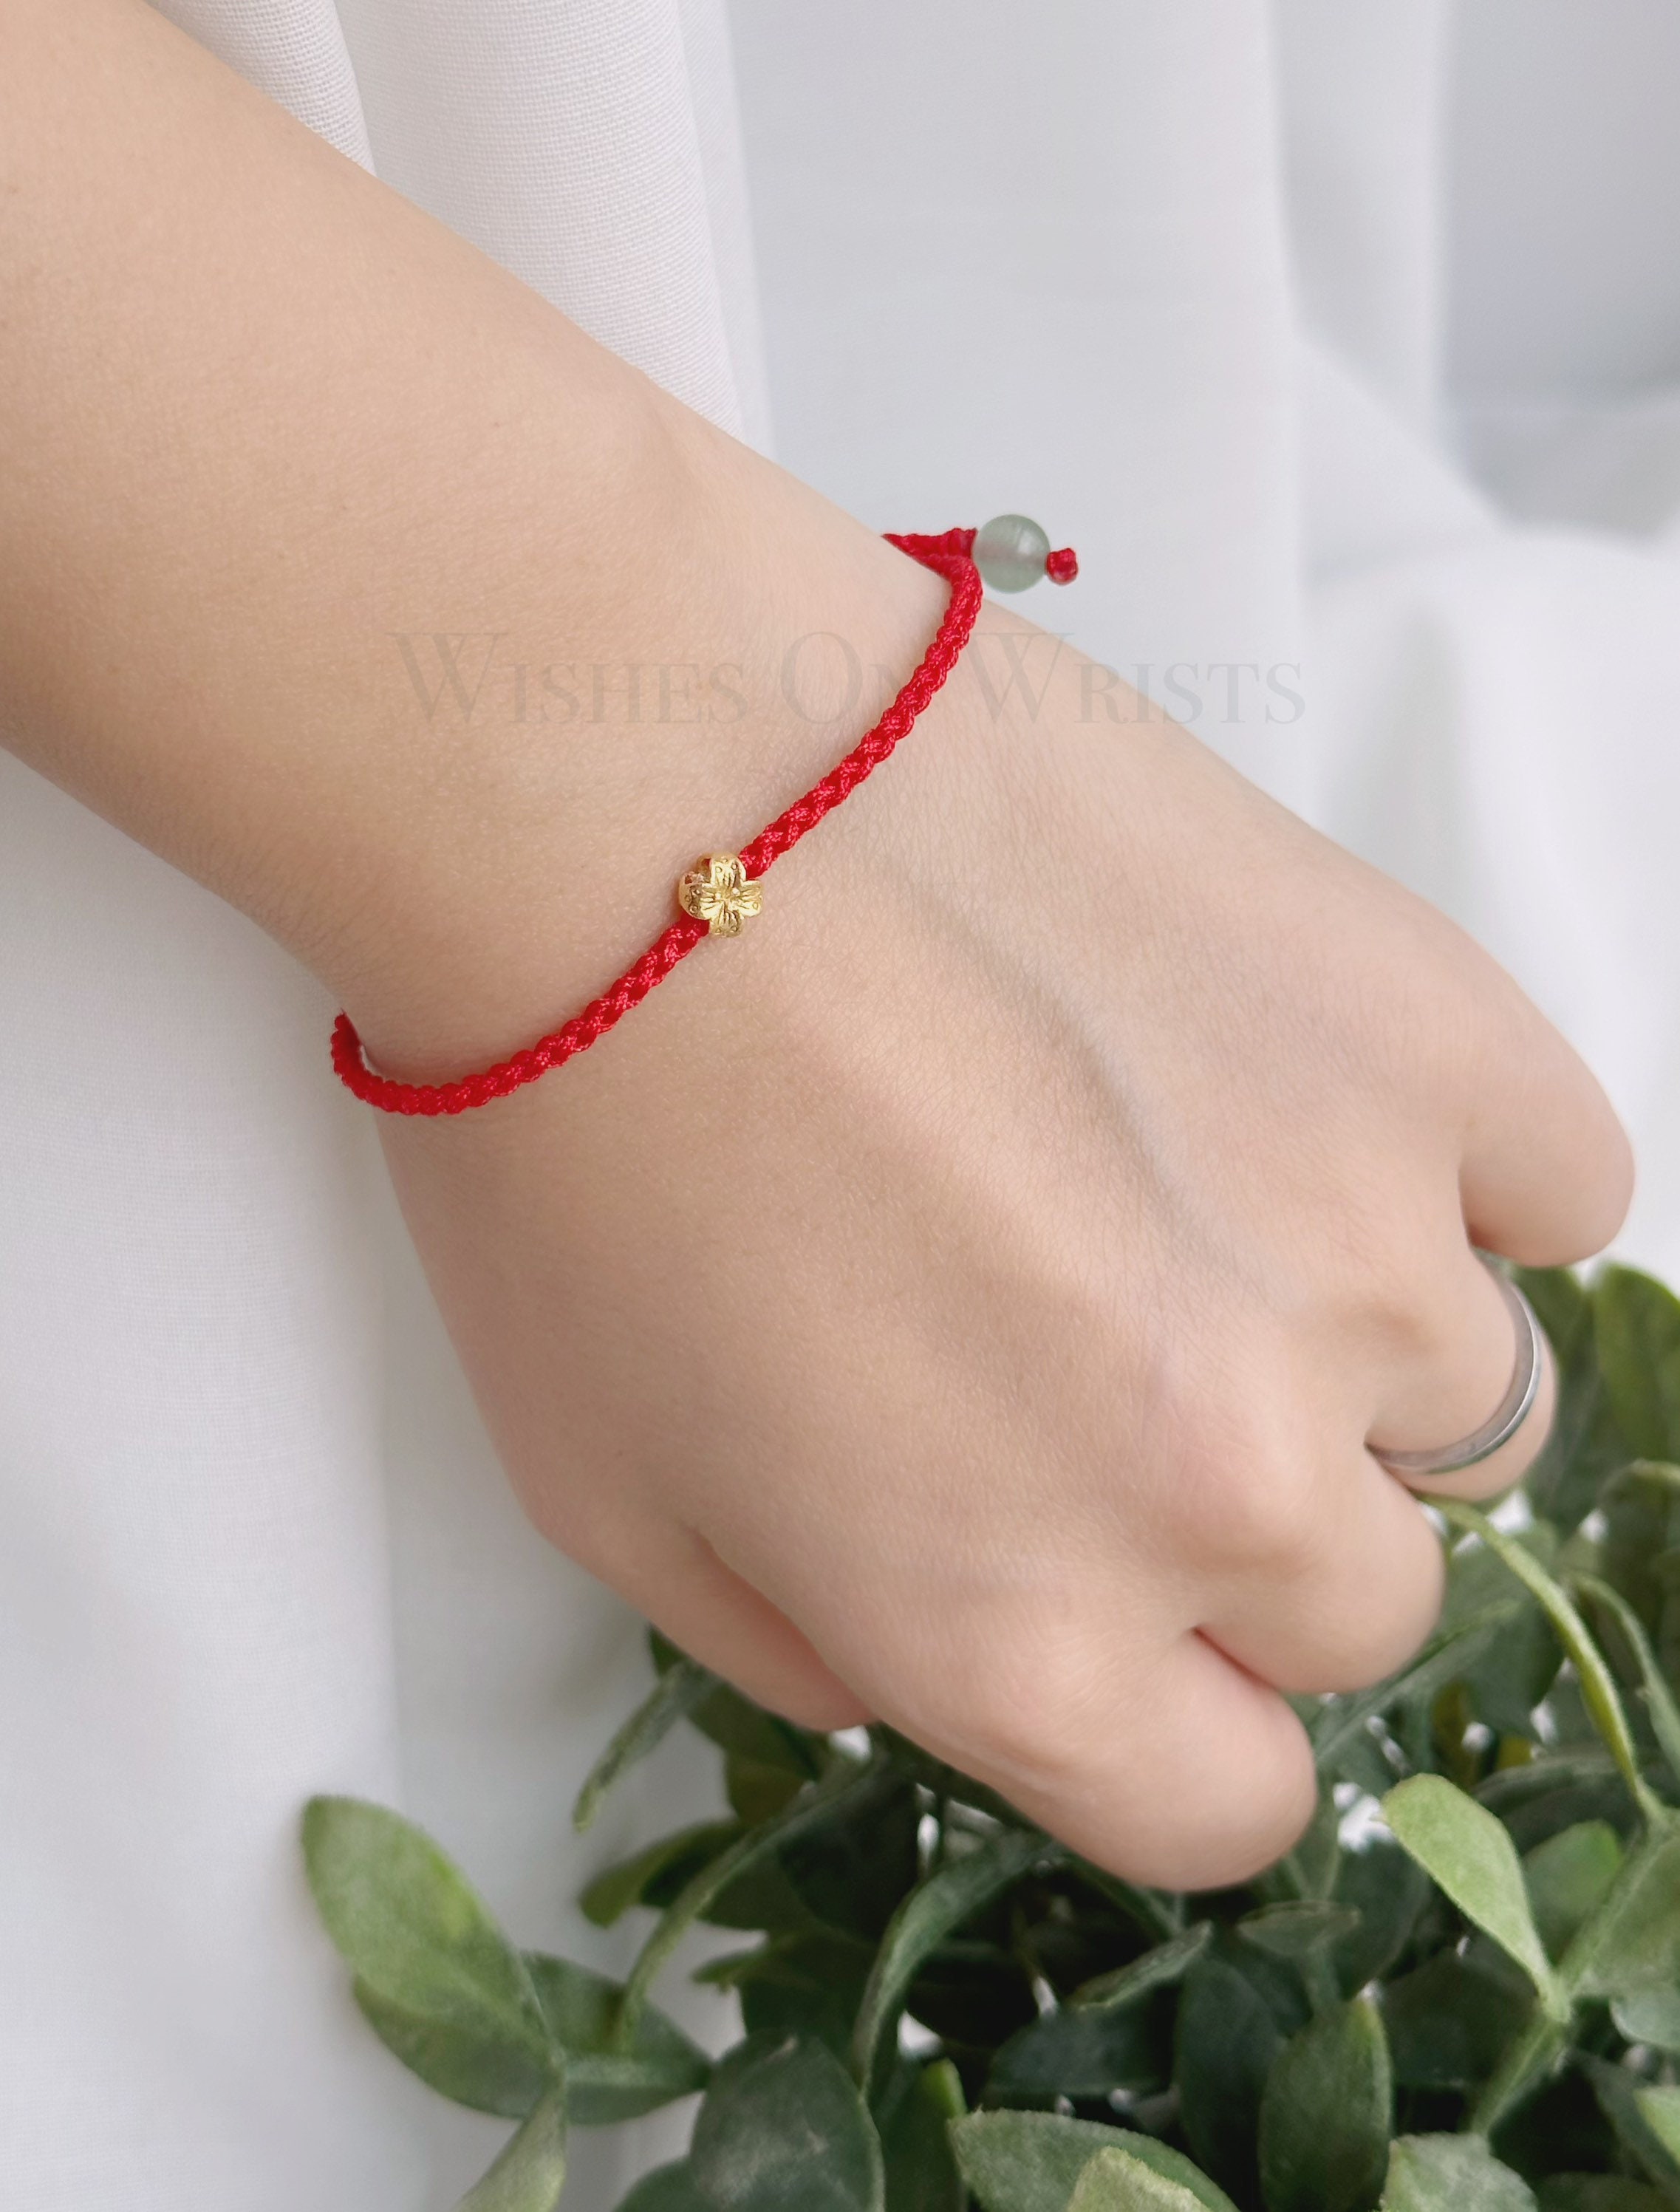 Chinese Traditional Feng Shui Red String Bracelet – One Lucky Wish